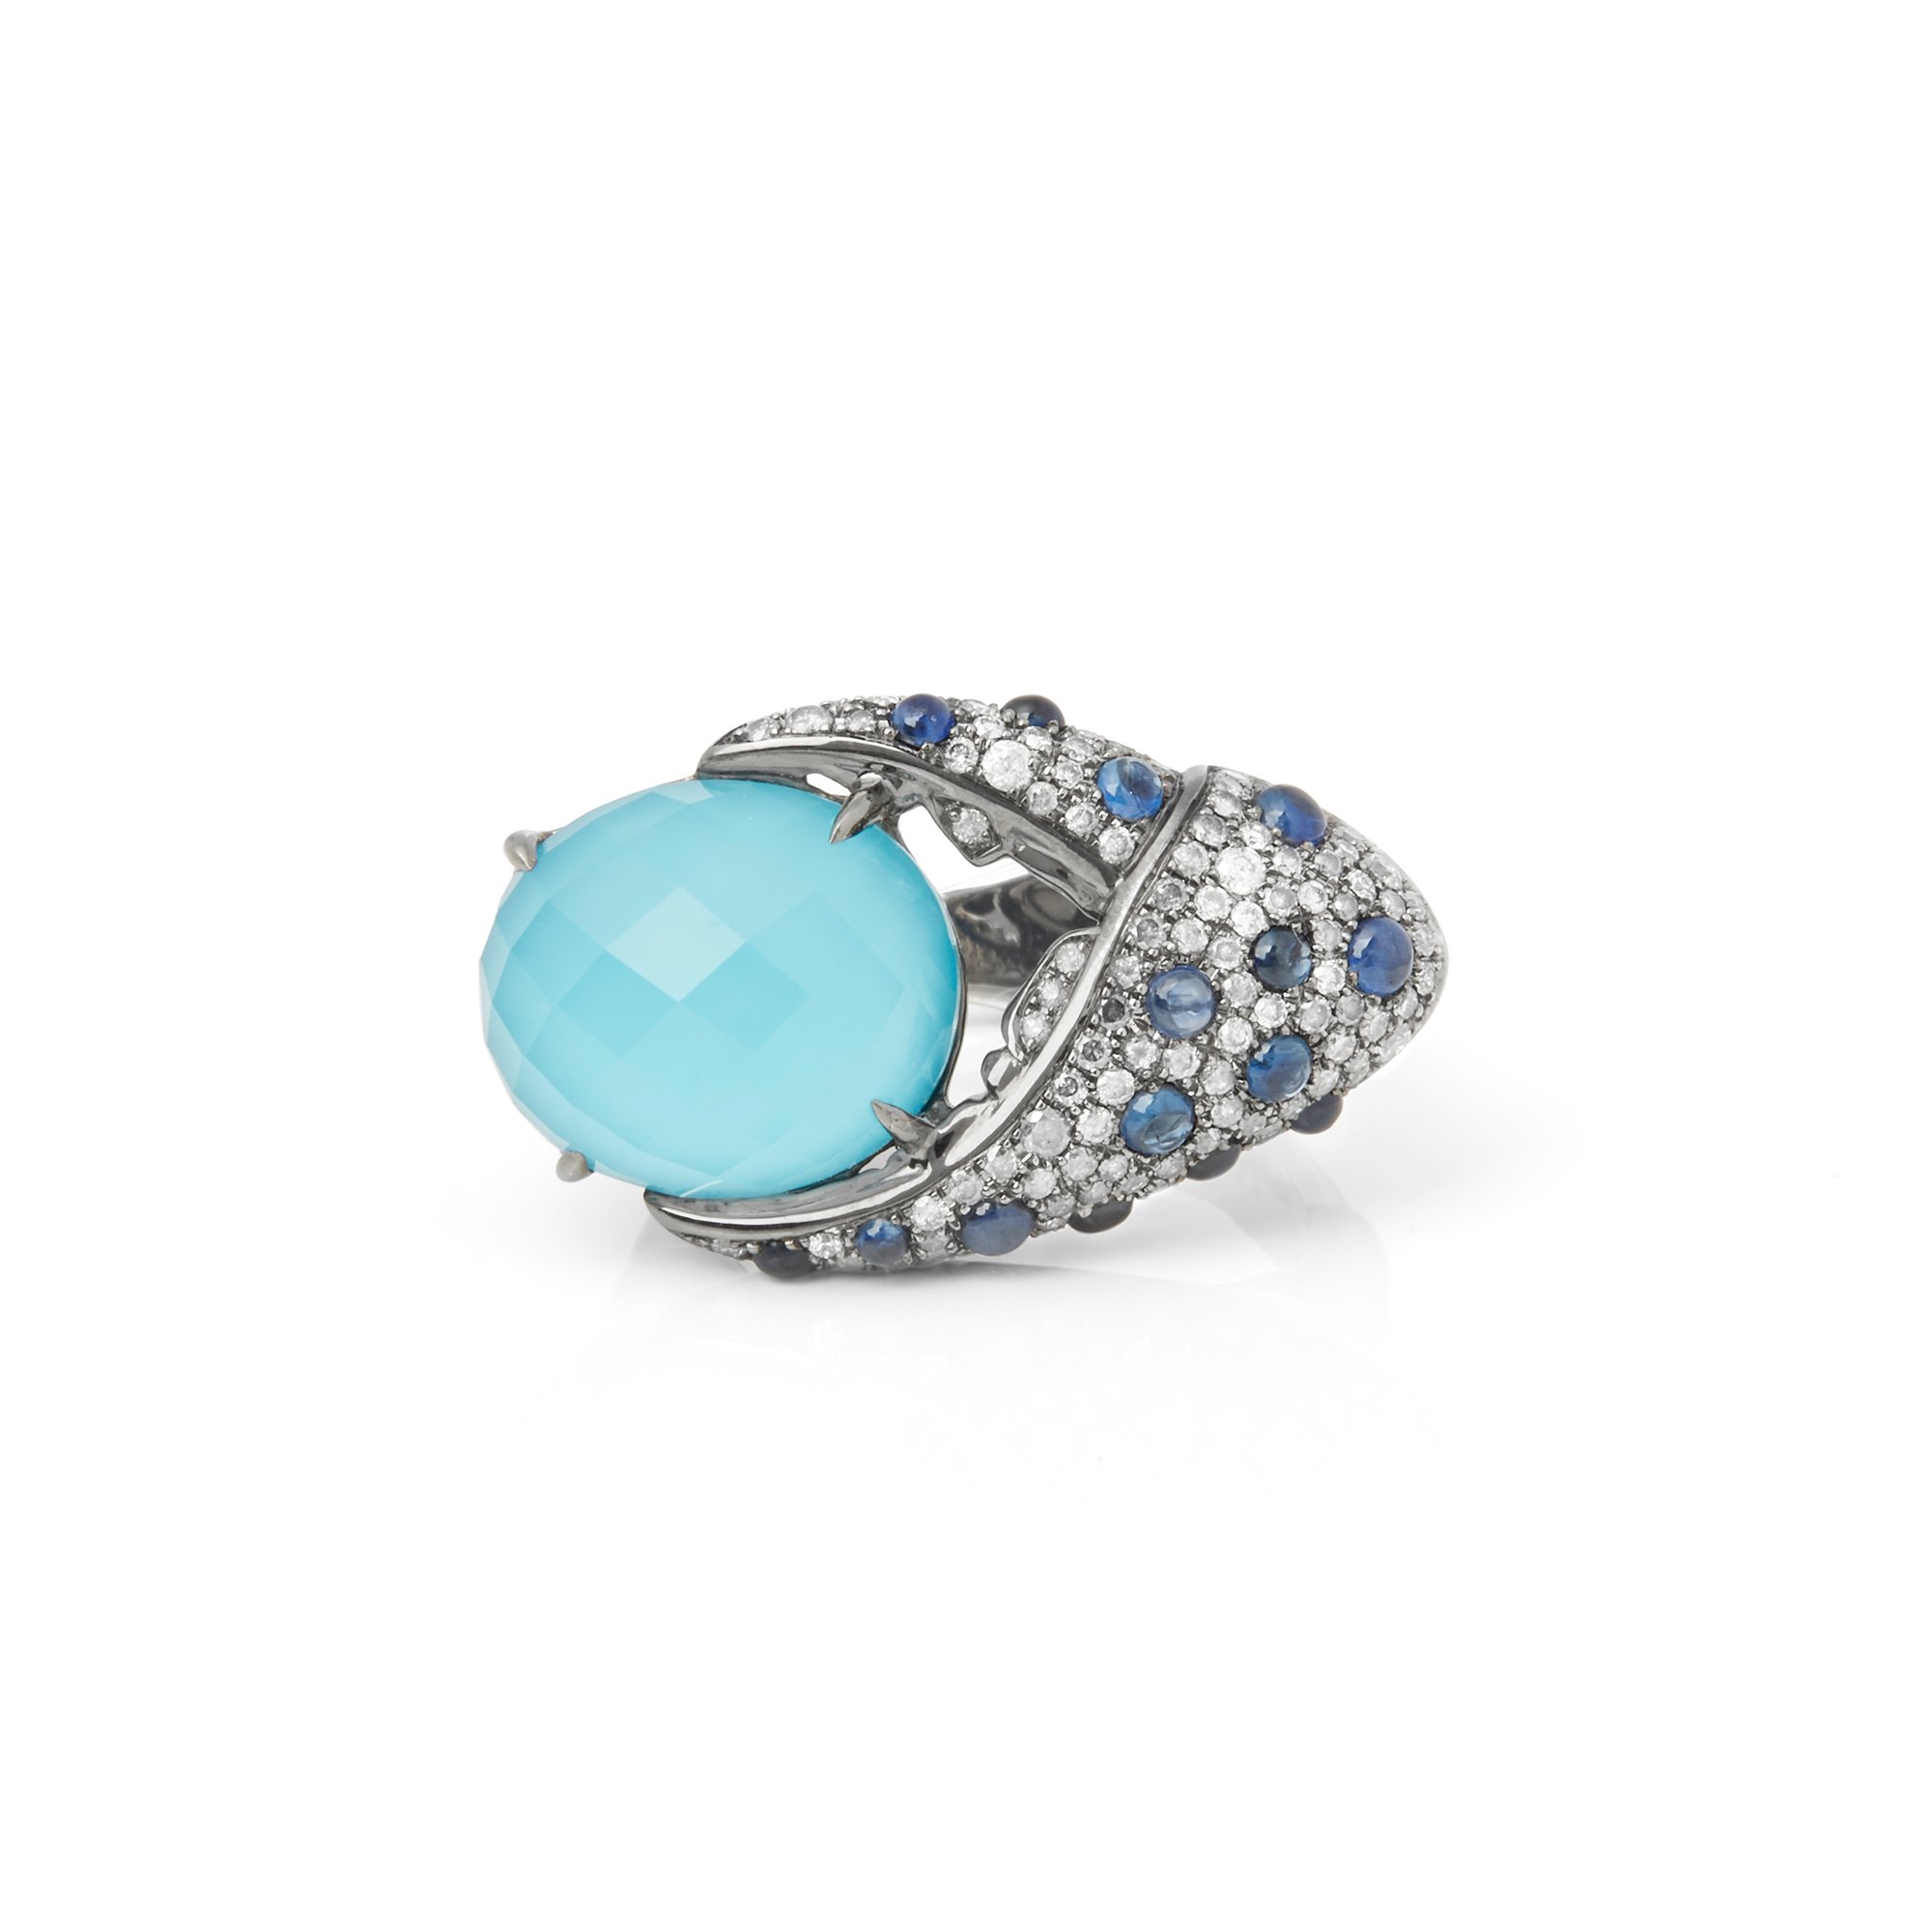 Stephen Webster Jewels Verne Turquoise and Blue Sapphire Ring